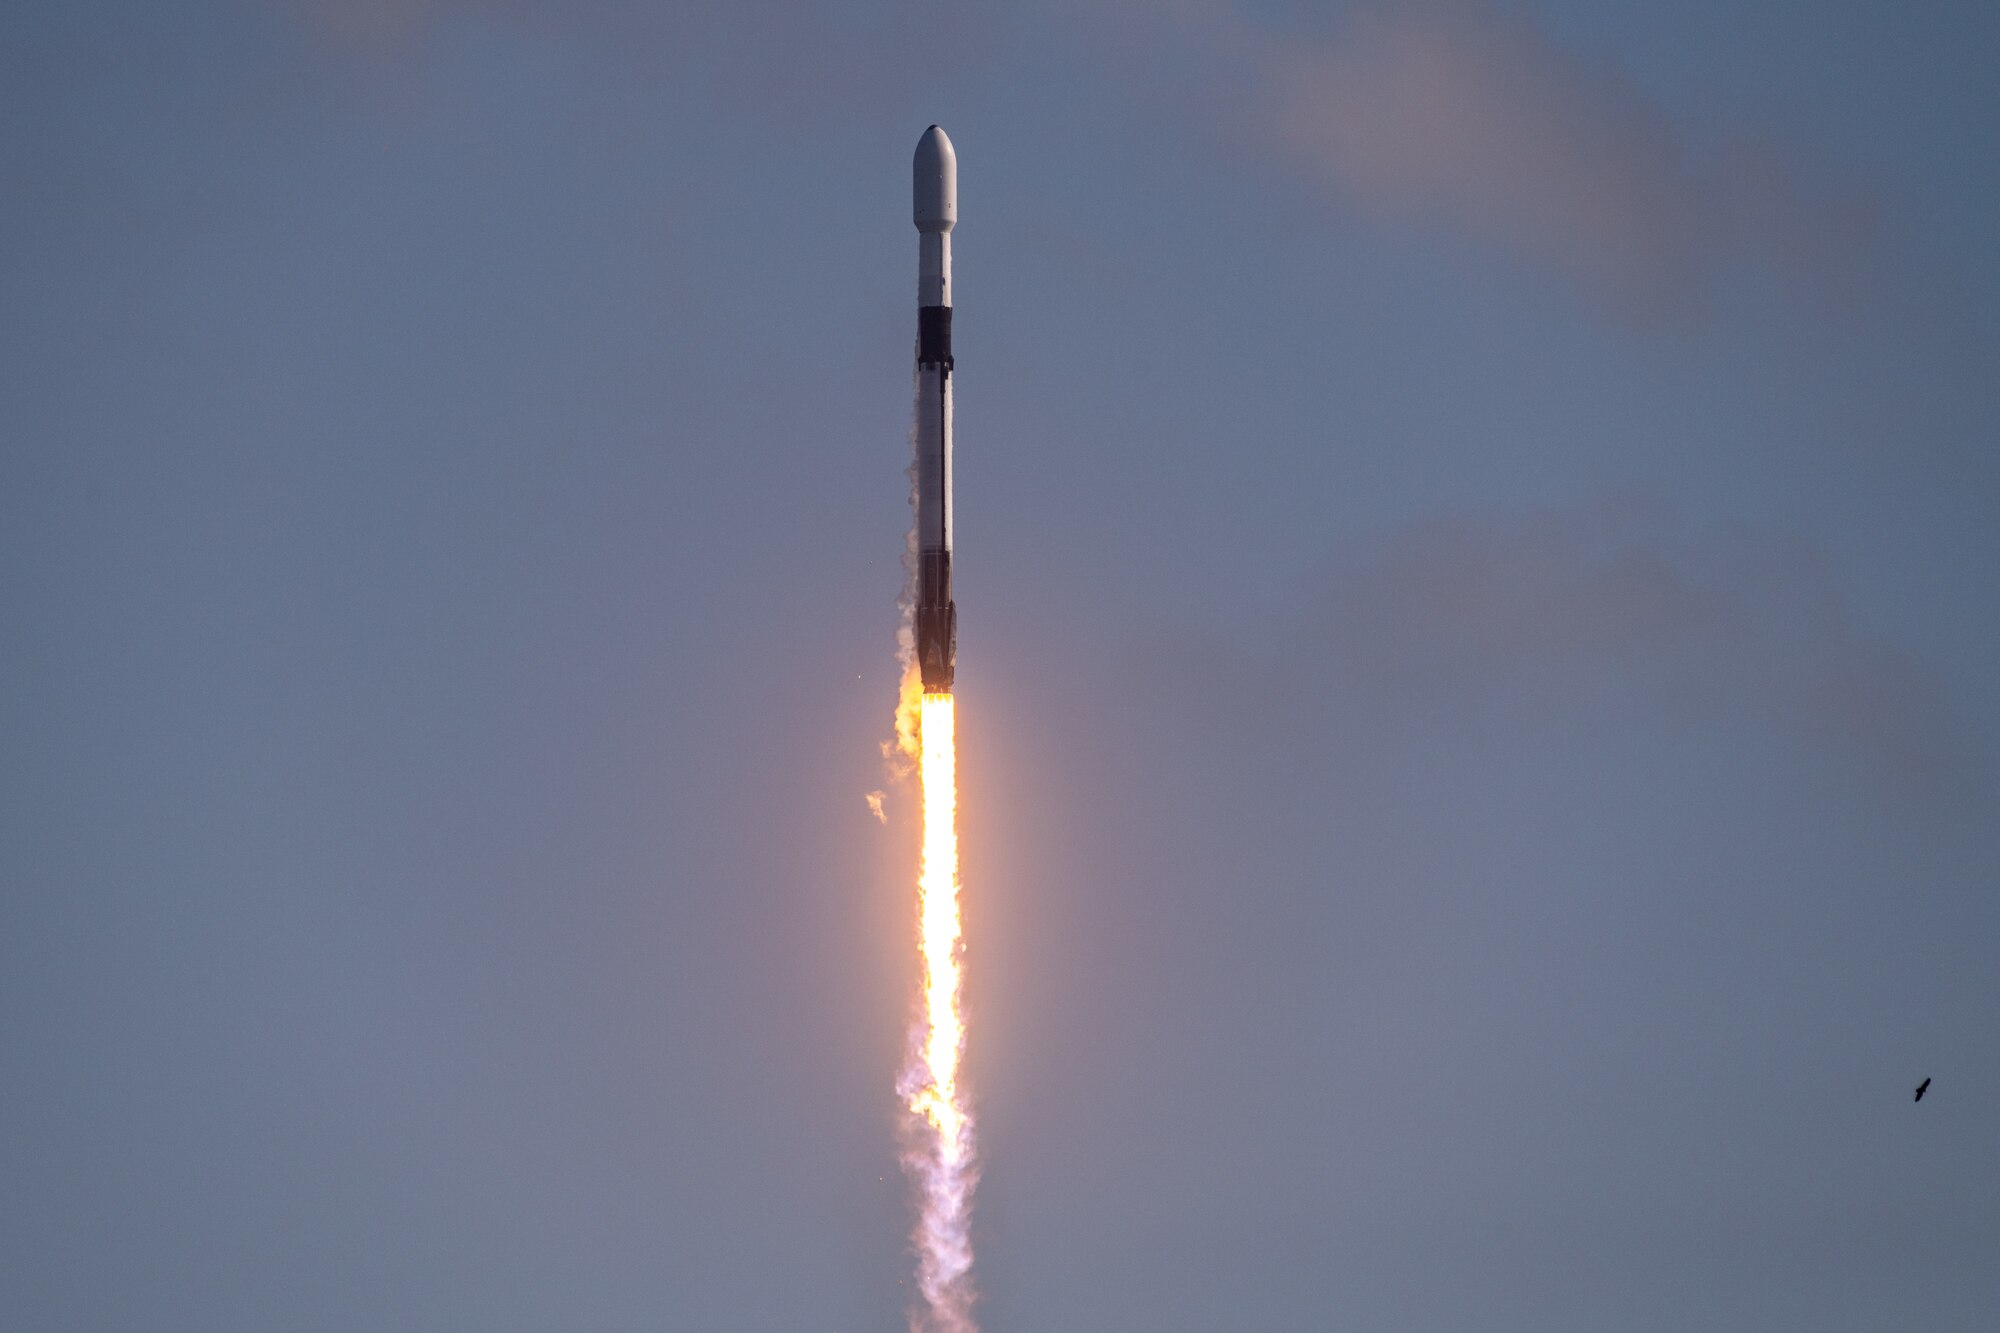 A Falcon 9 rocket launches from Space Launch Complex 40 at Cape Canaveral Space Force Station, Fla., March 9, 2022. The Starlink 4-10 mission carried the next batch of SpaceX’s Starlink satellites into orbit. (U.S. Space Force photo by Joshua Conti